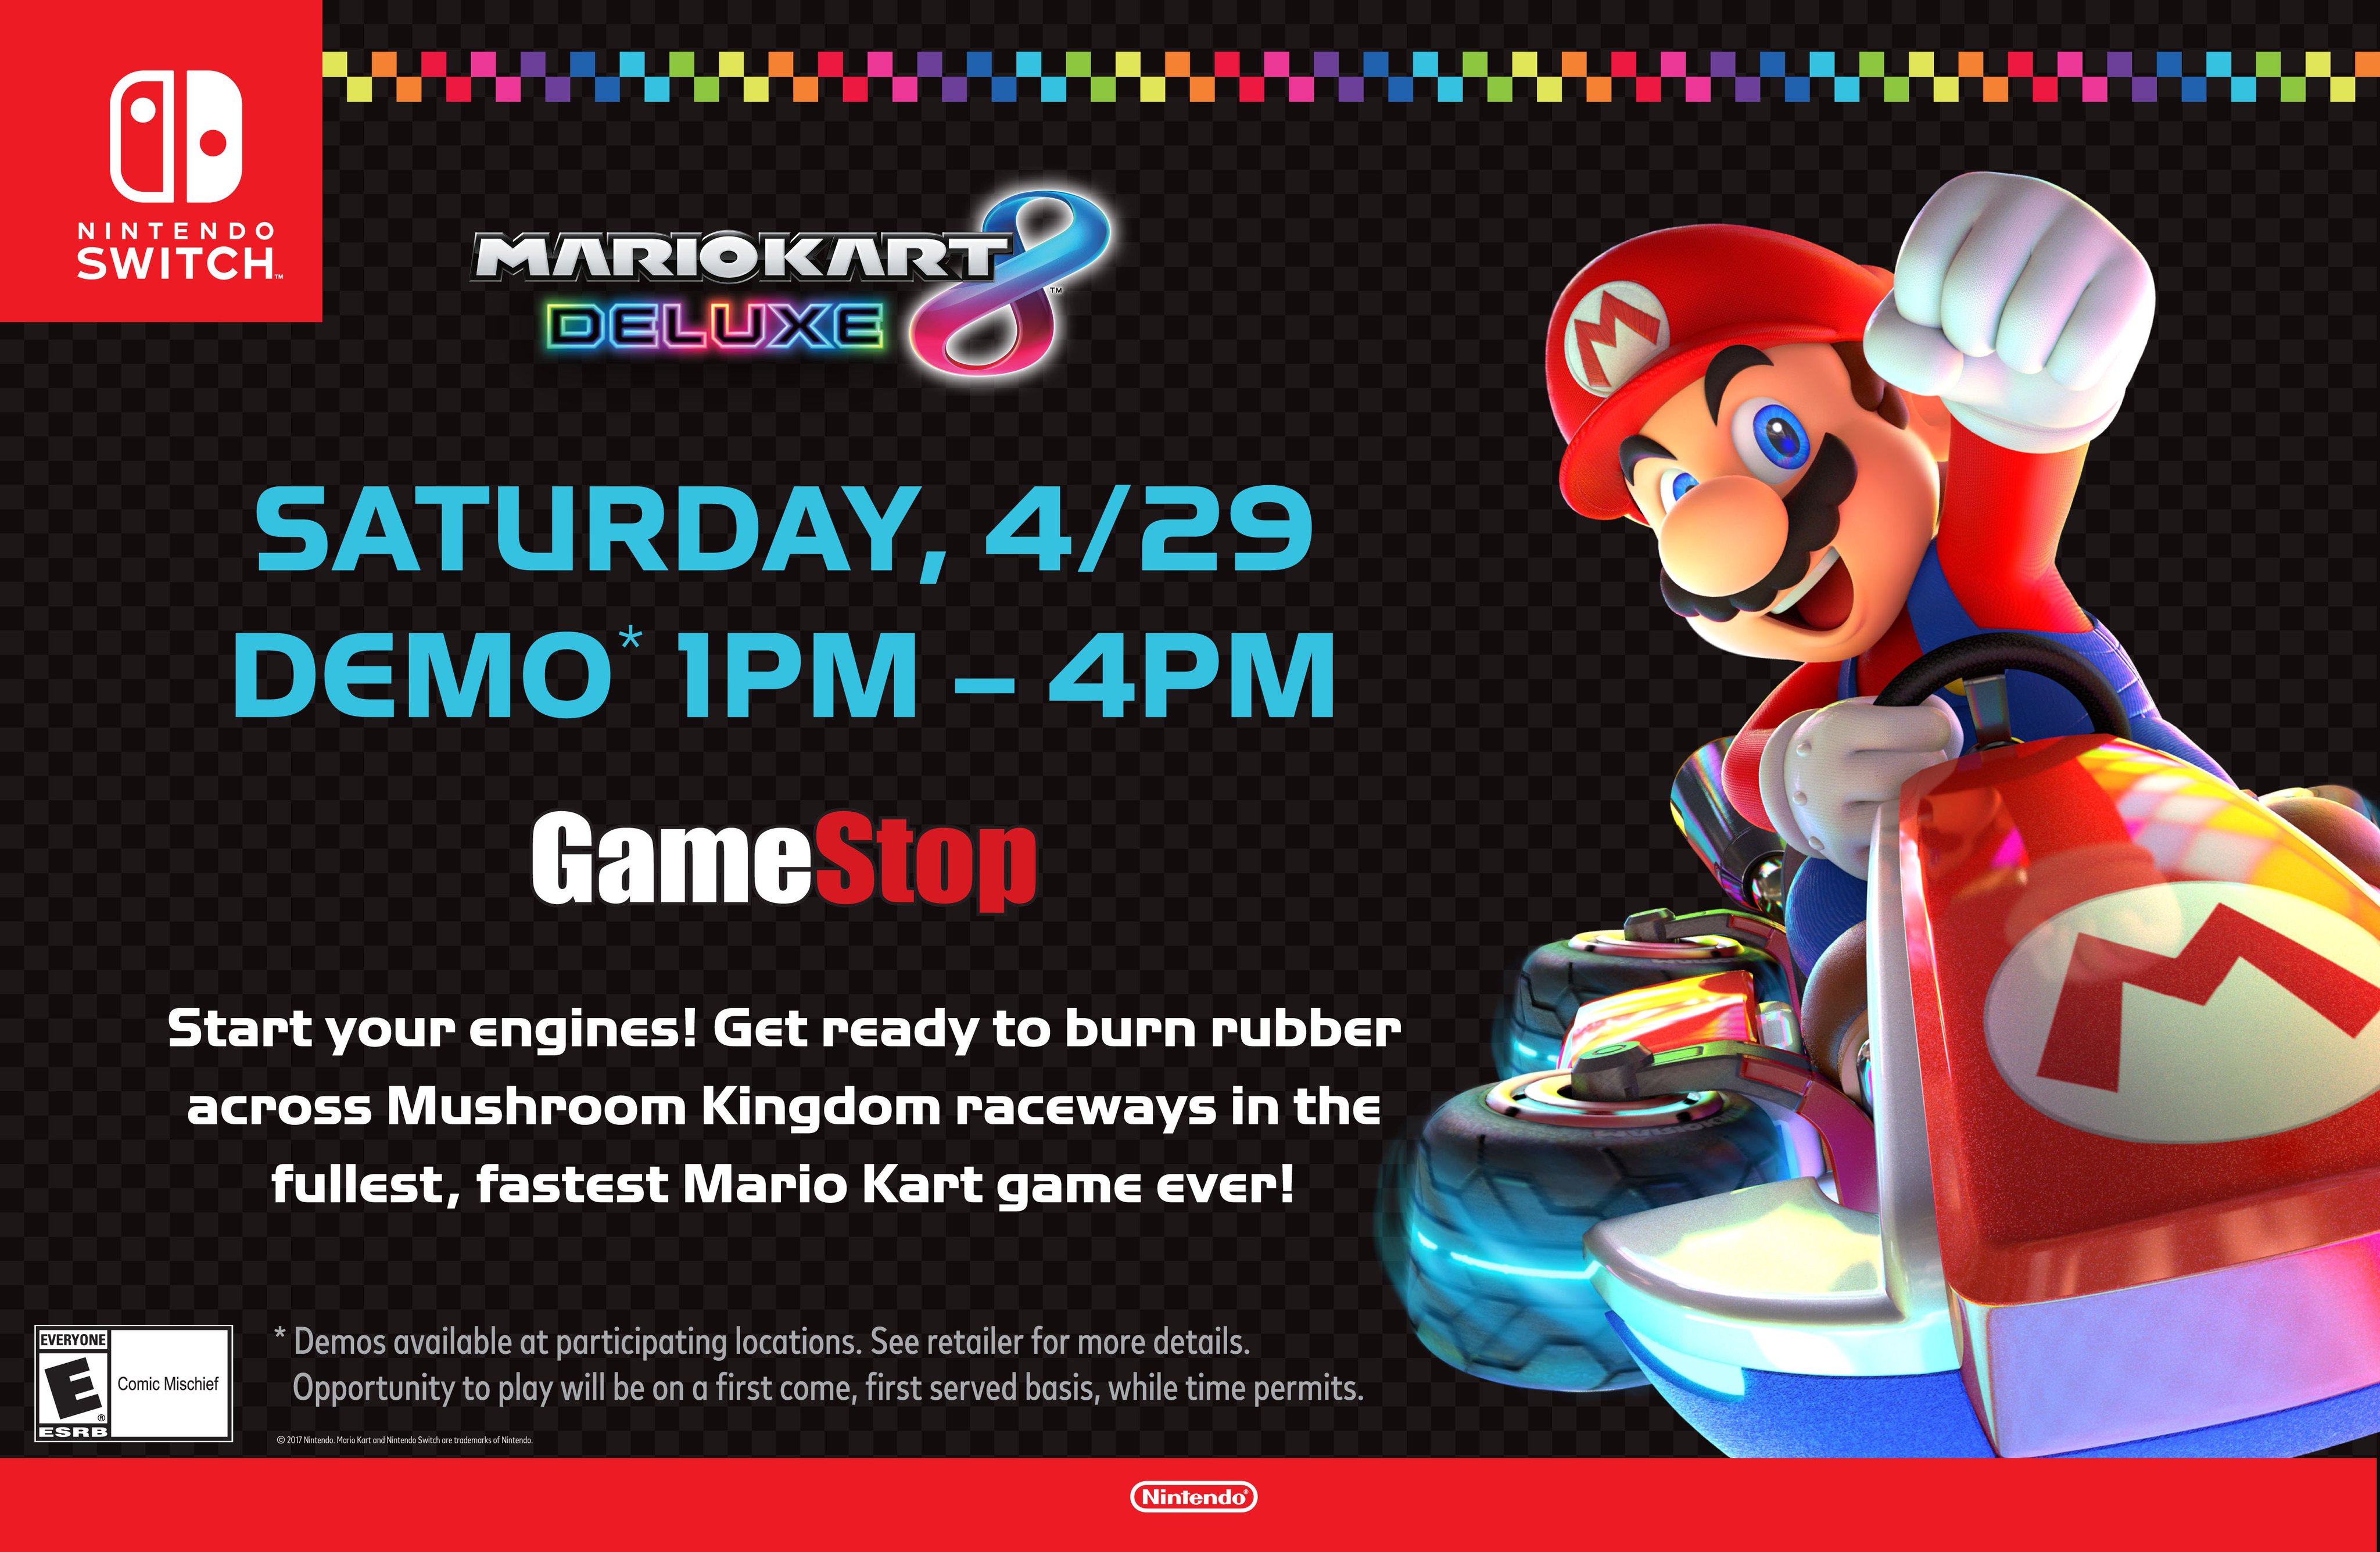 bjælke Slip sko Overlegenhed Nintendo of America on Twitter: "Play #MarioKart 8 Deluxe on  #NintendoSwitch this Saturday, April 29 @GameStop stores from 1pm-4pm.  Check your local store for more details. https://t.co/6DJi2FqkFW" / Twitter